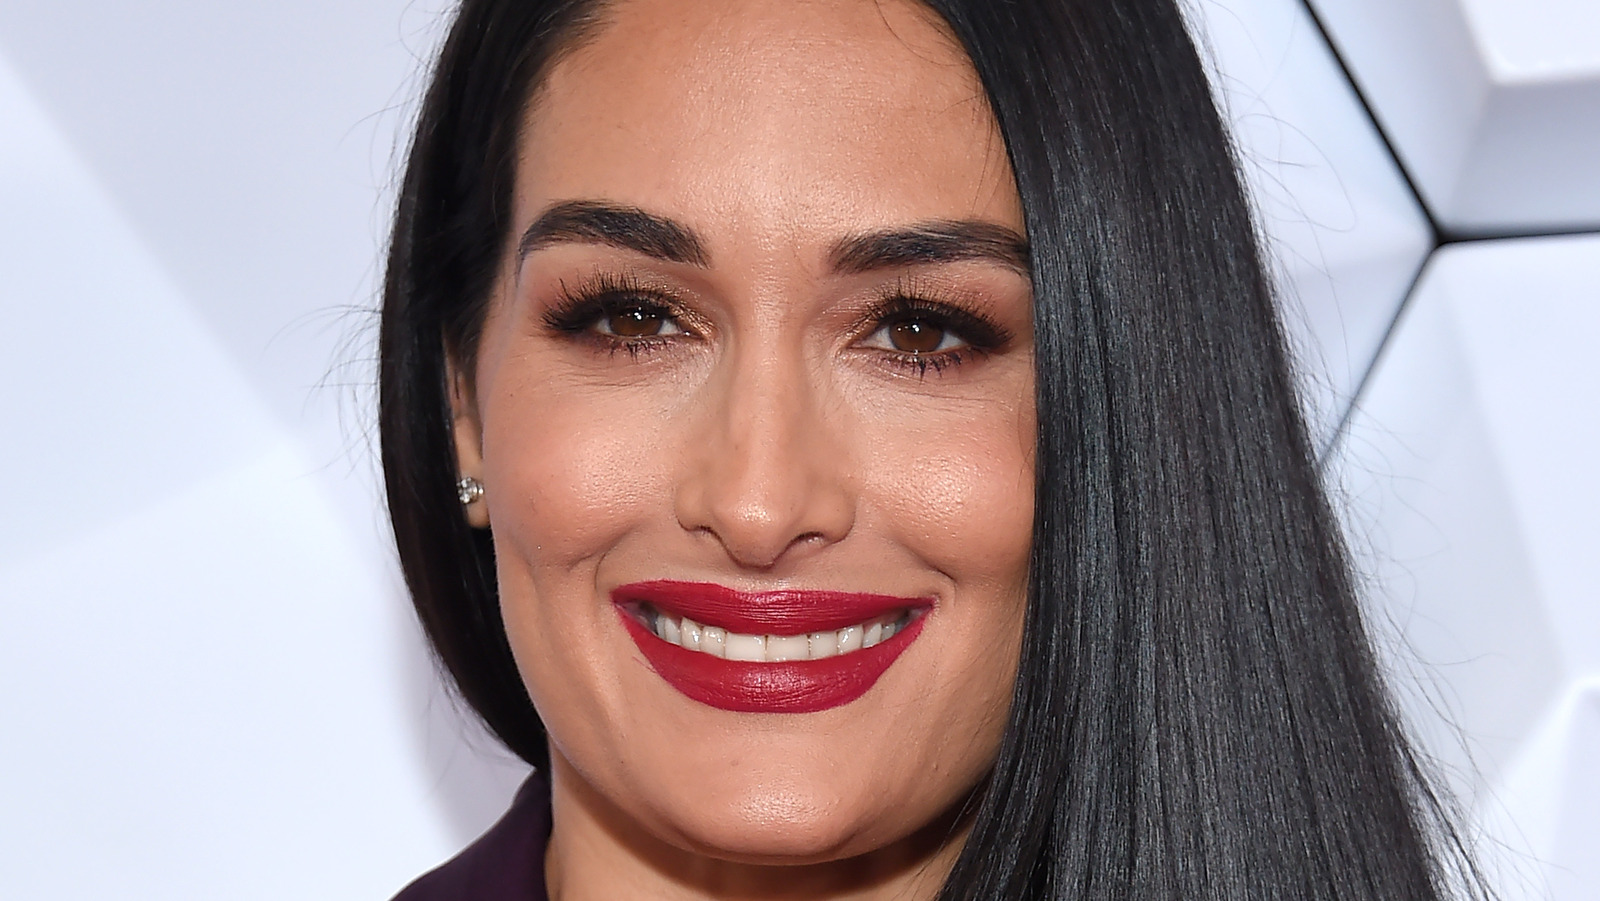 Nikki Bella Is In Hot Water With Fans. Here's Why